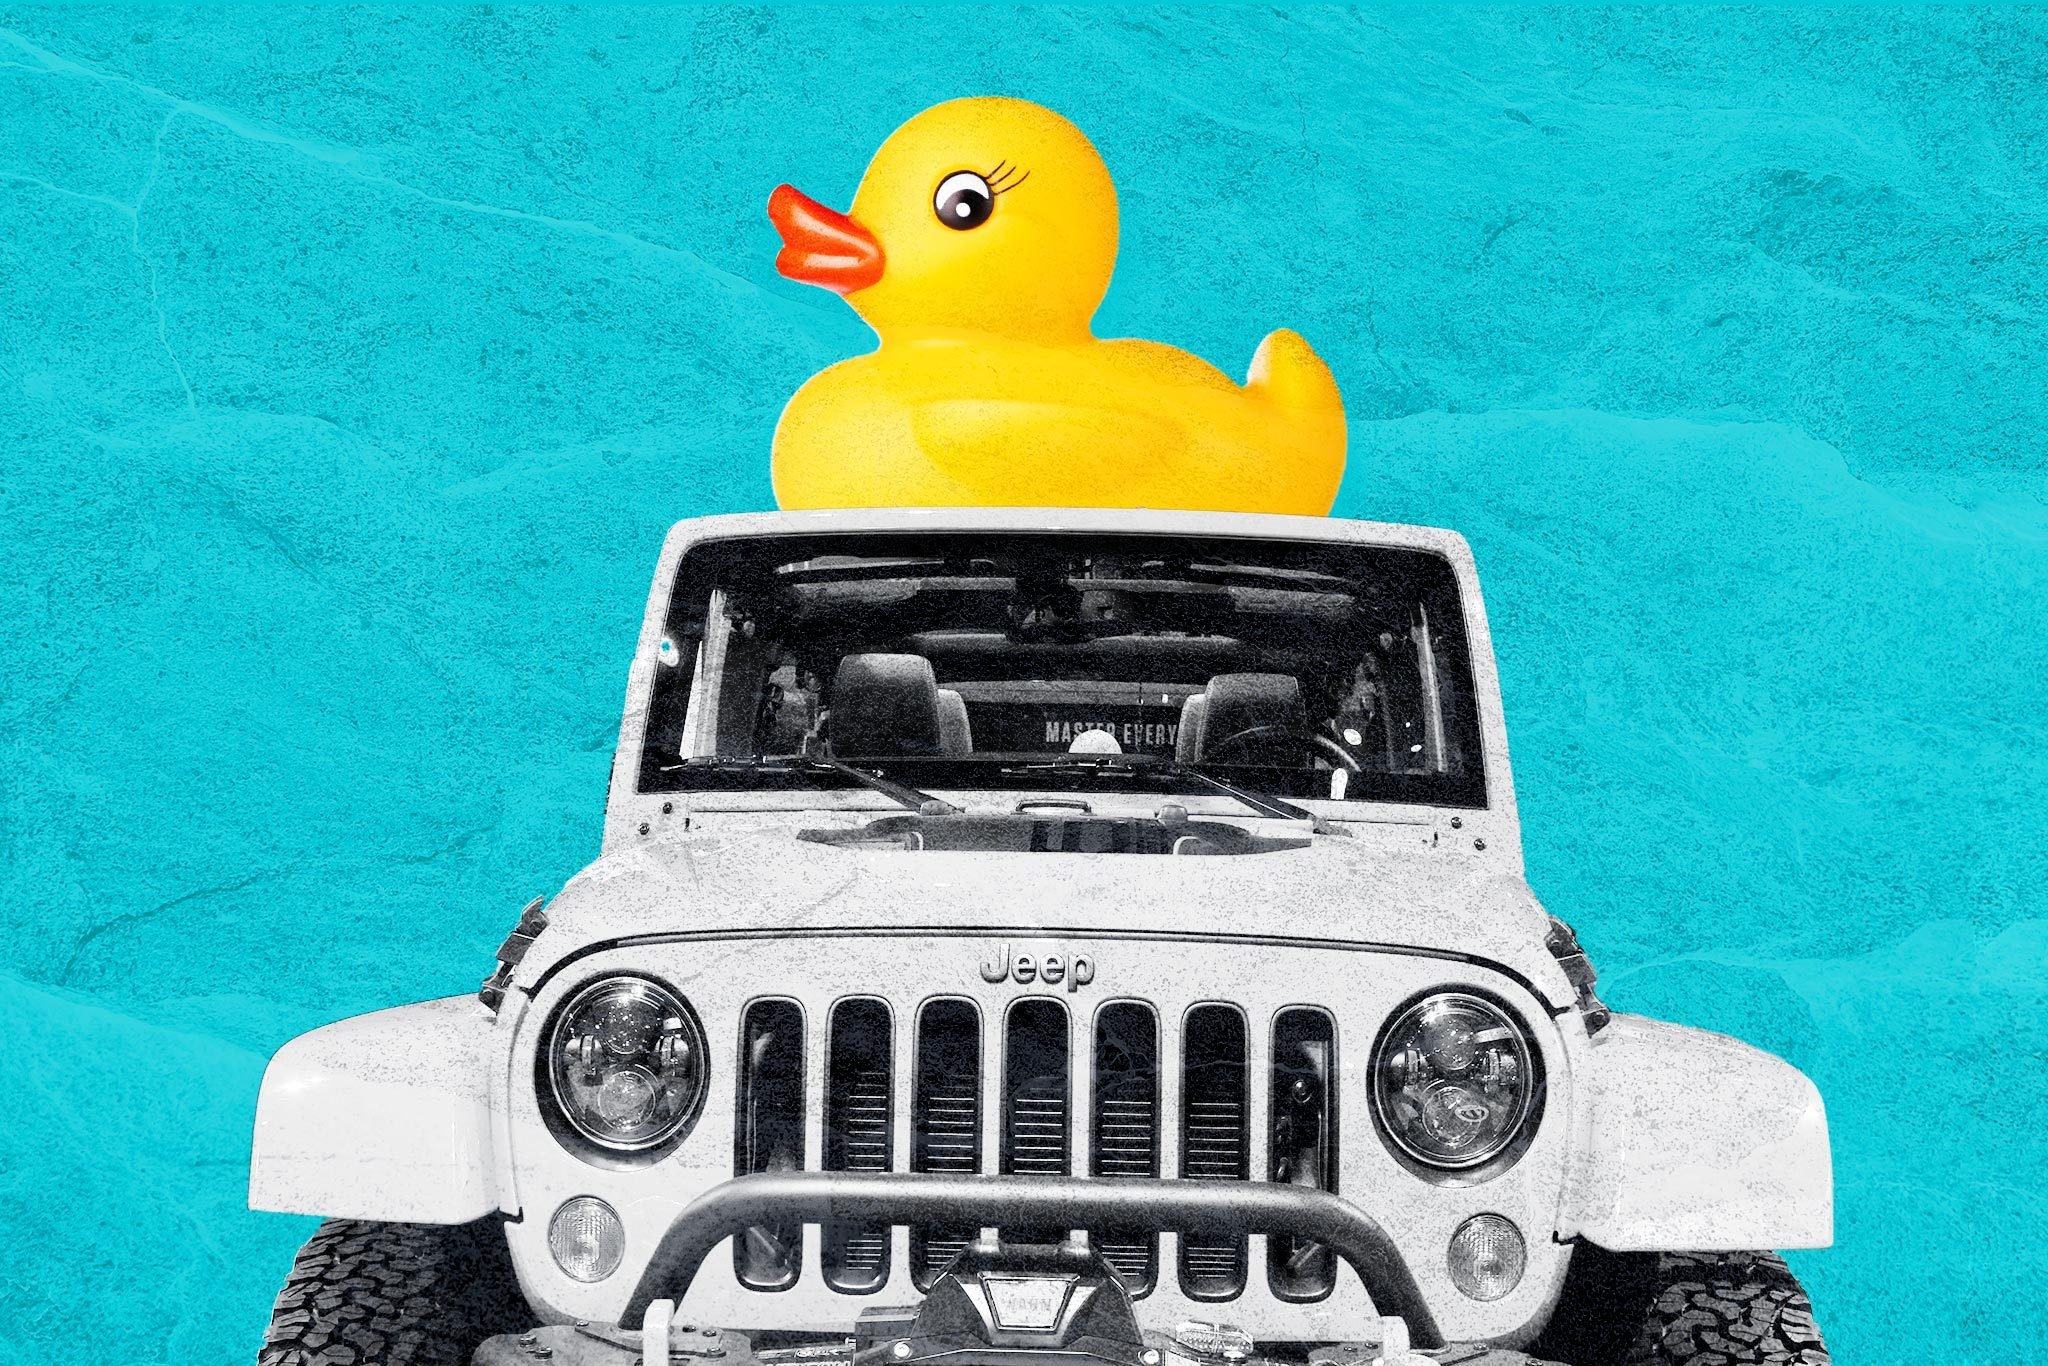 a large yellow rubber ducky sitting on the roof of a jeep with a teal background textured with rocks